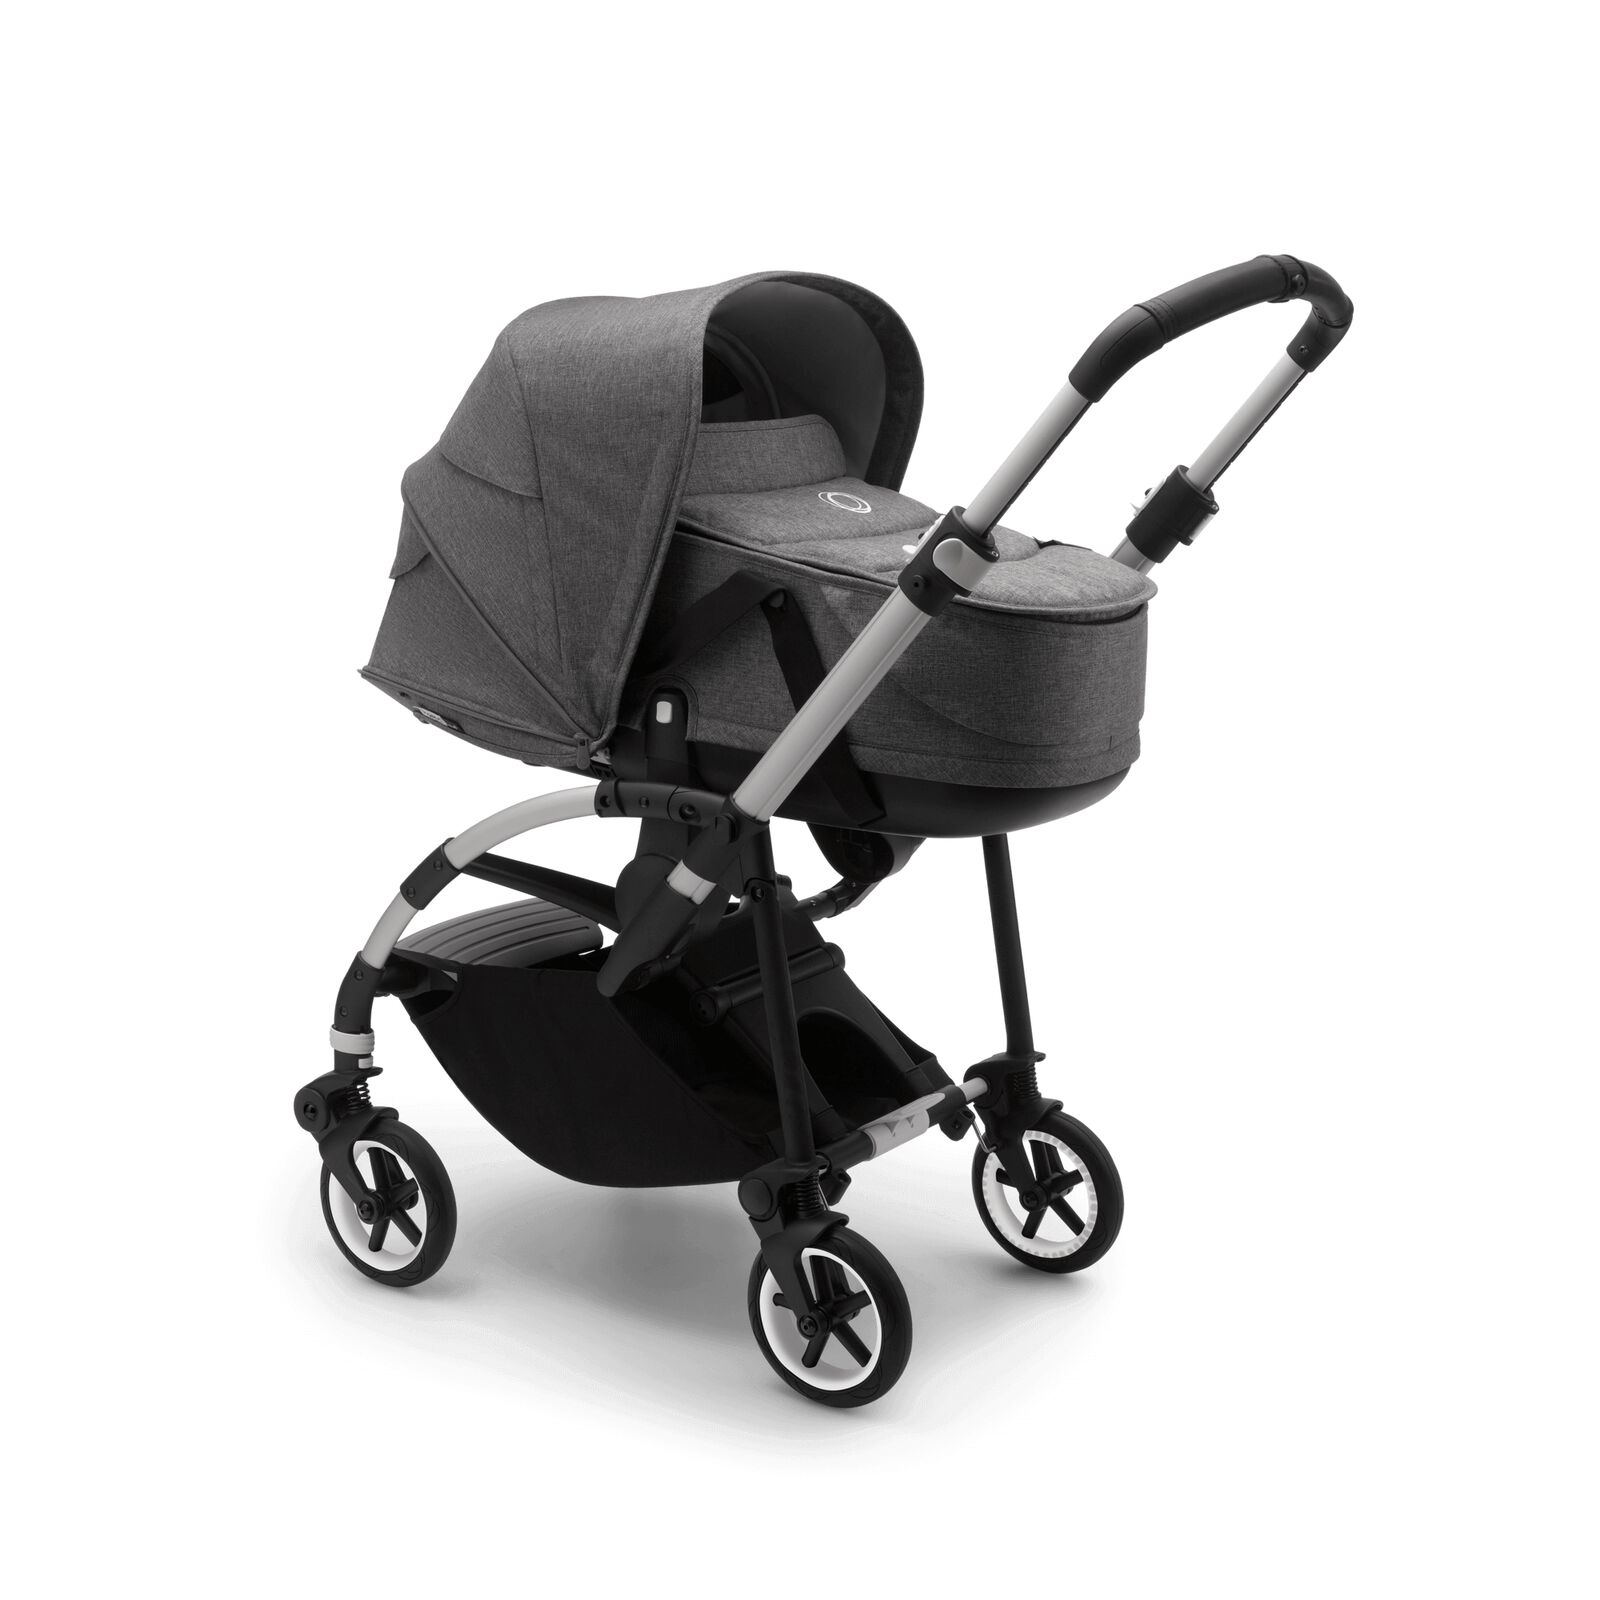 Bugaboo Bee 6 seat and bassinet stroller - View 6